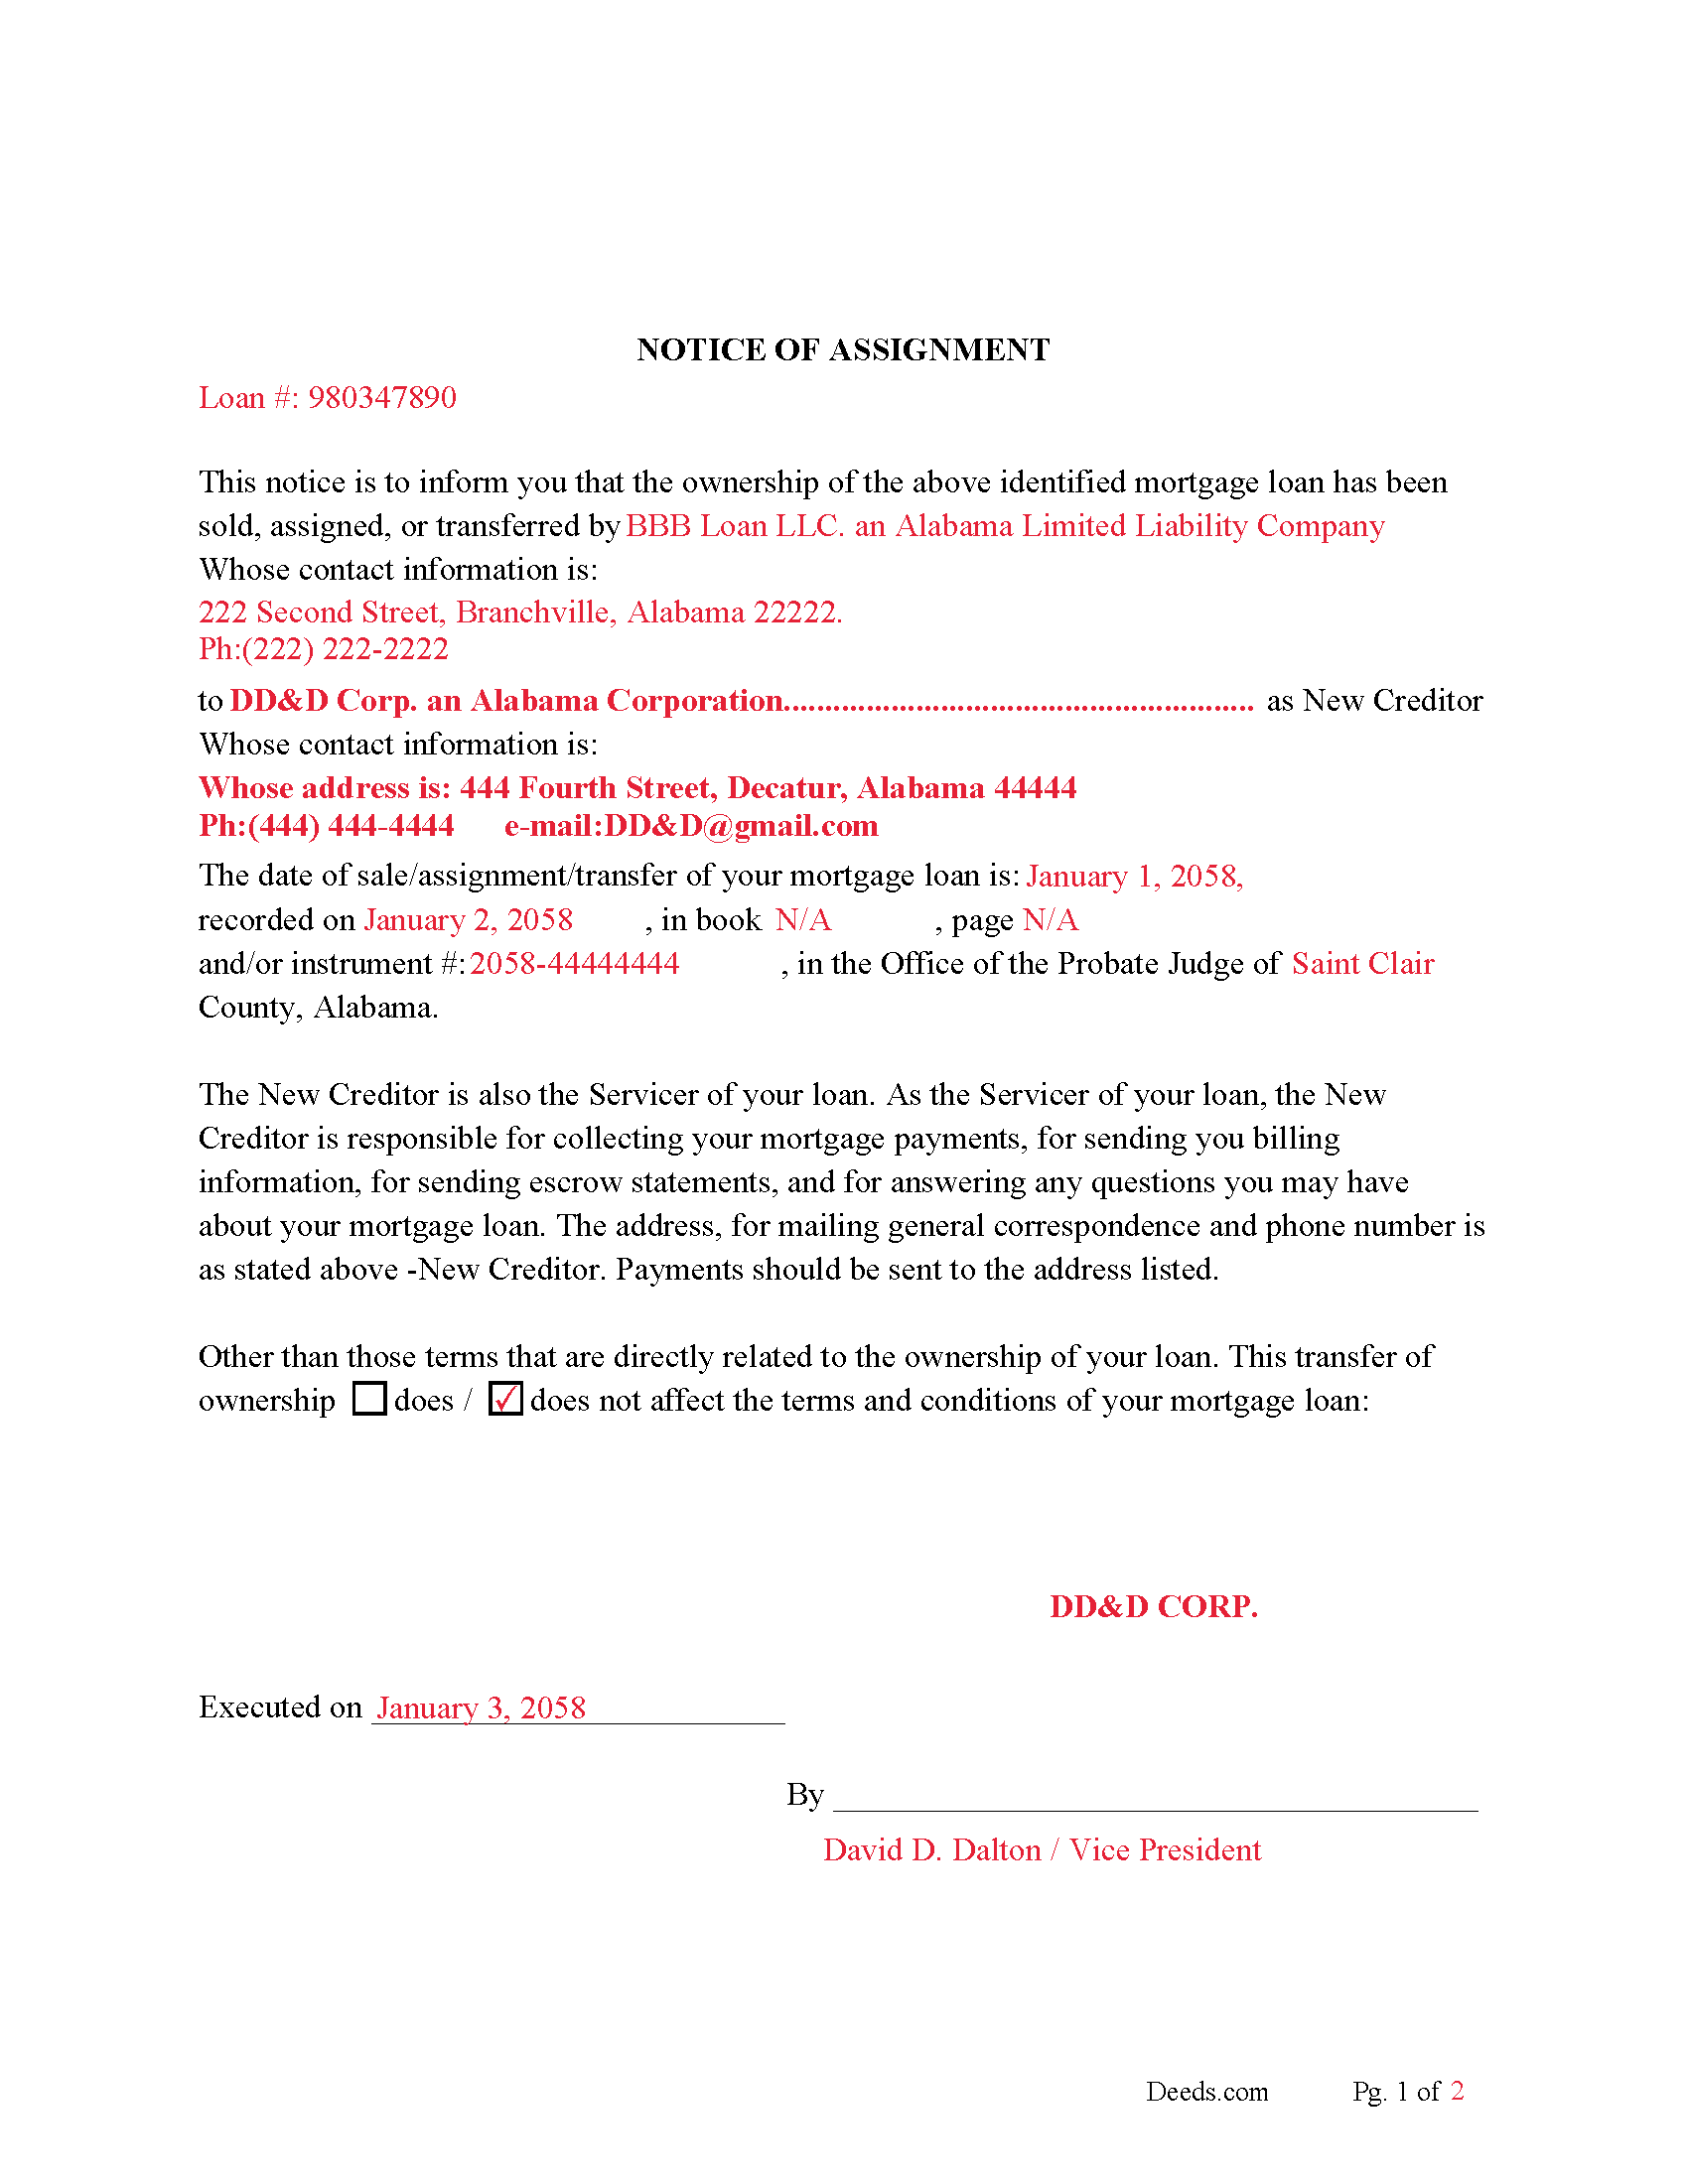 Completed Example of the Notice of Assignment Document